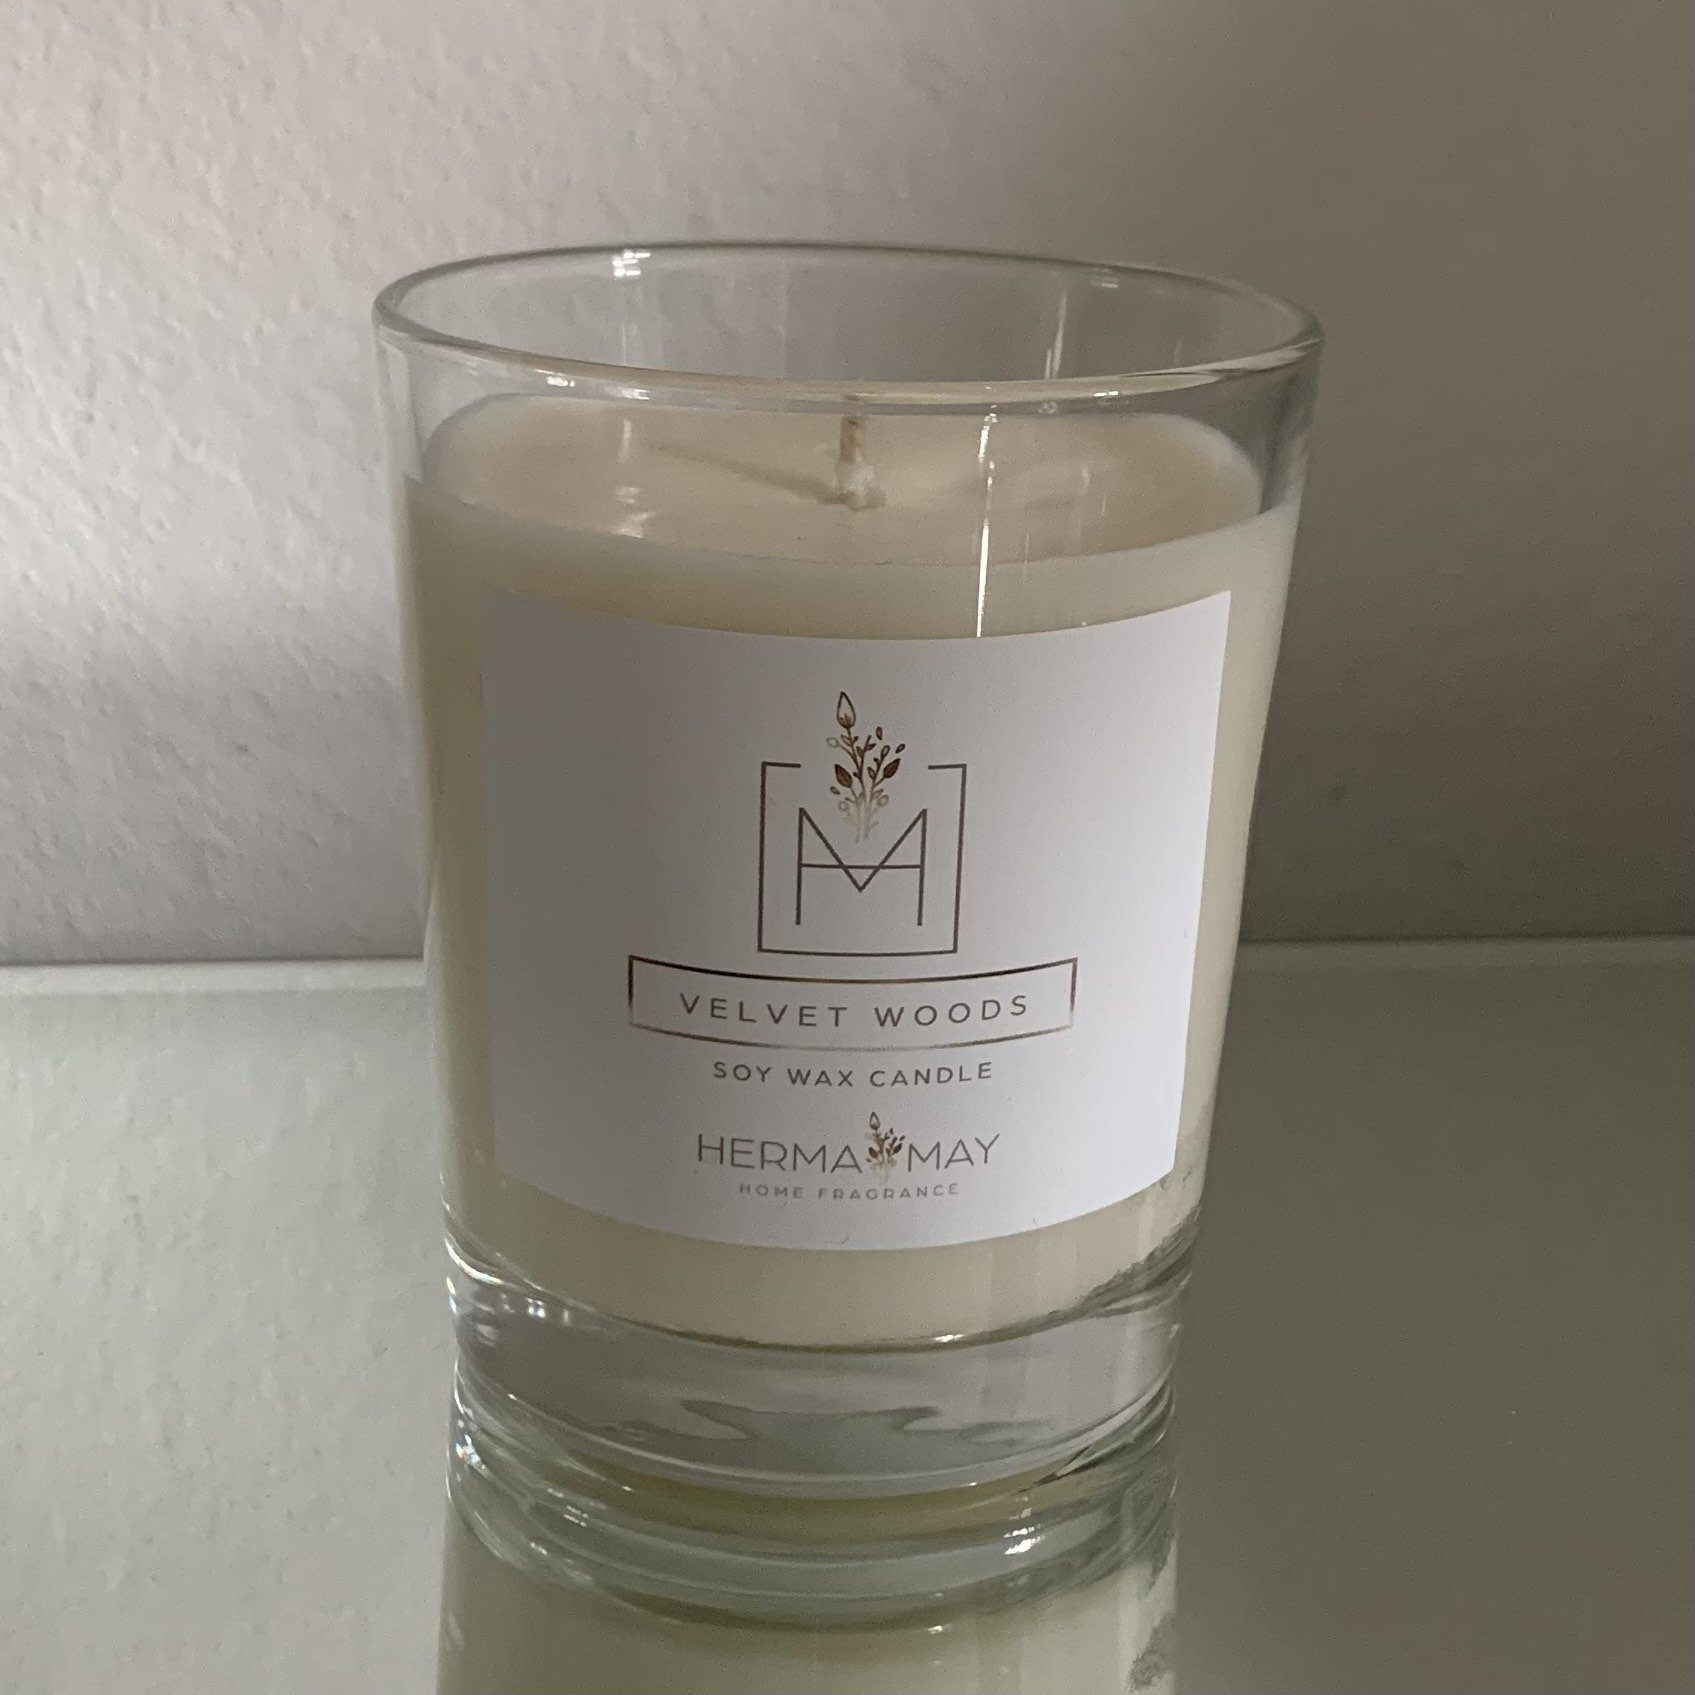 Velvet Woods Soy Wax Candle